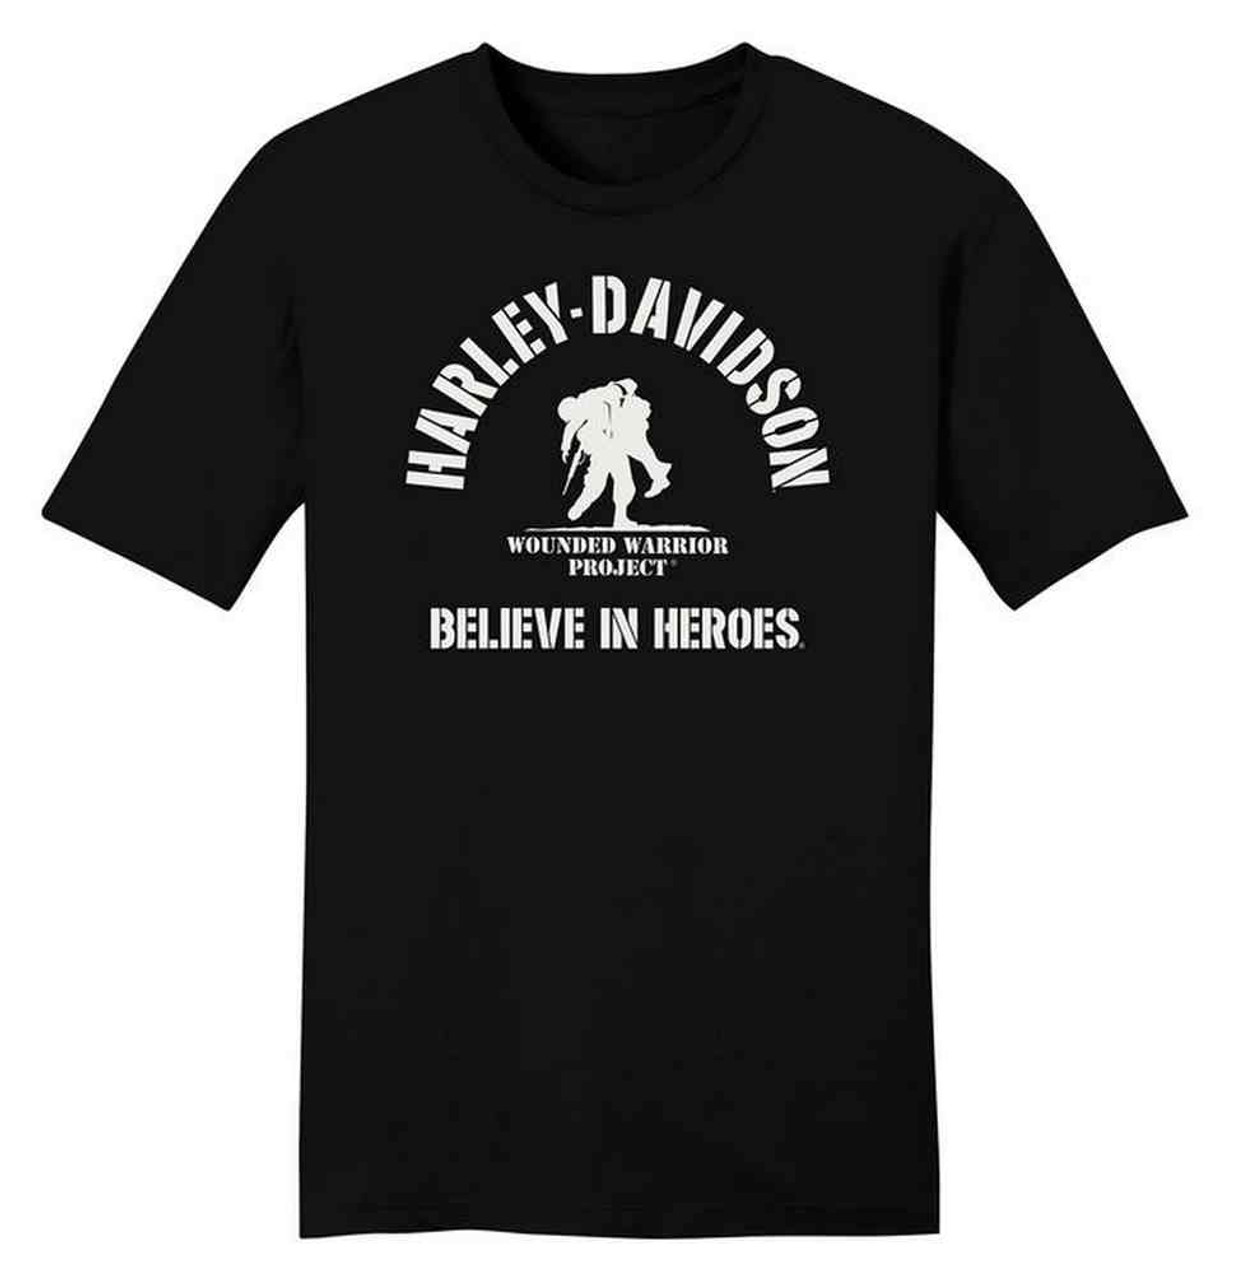 Harley-Davidson® Men's Wounded Warrior Project Honor Short Sleeve Tee ...